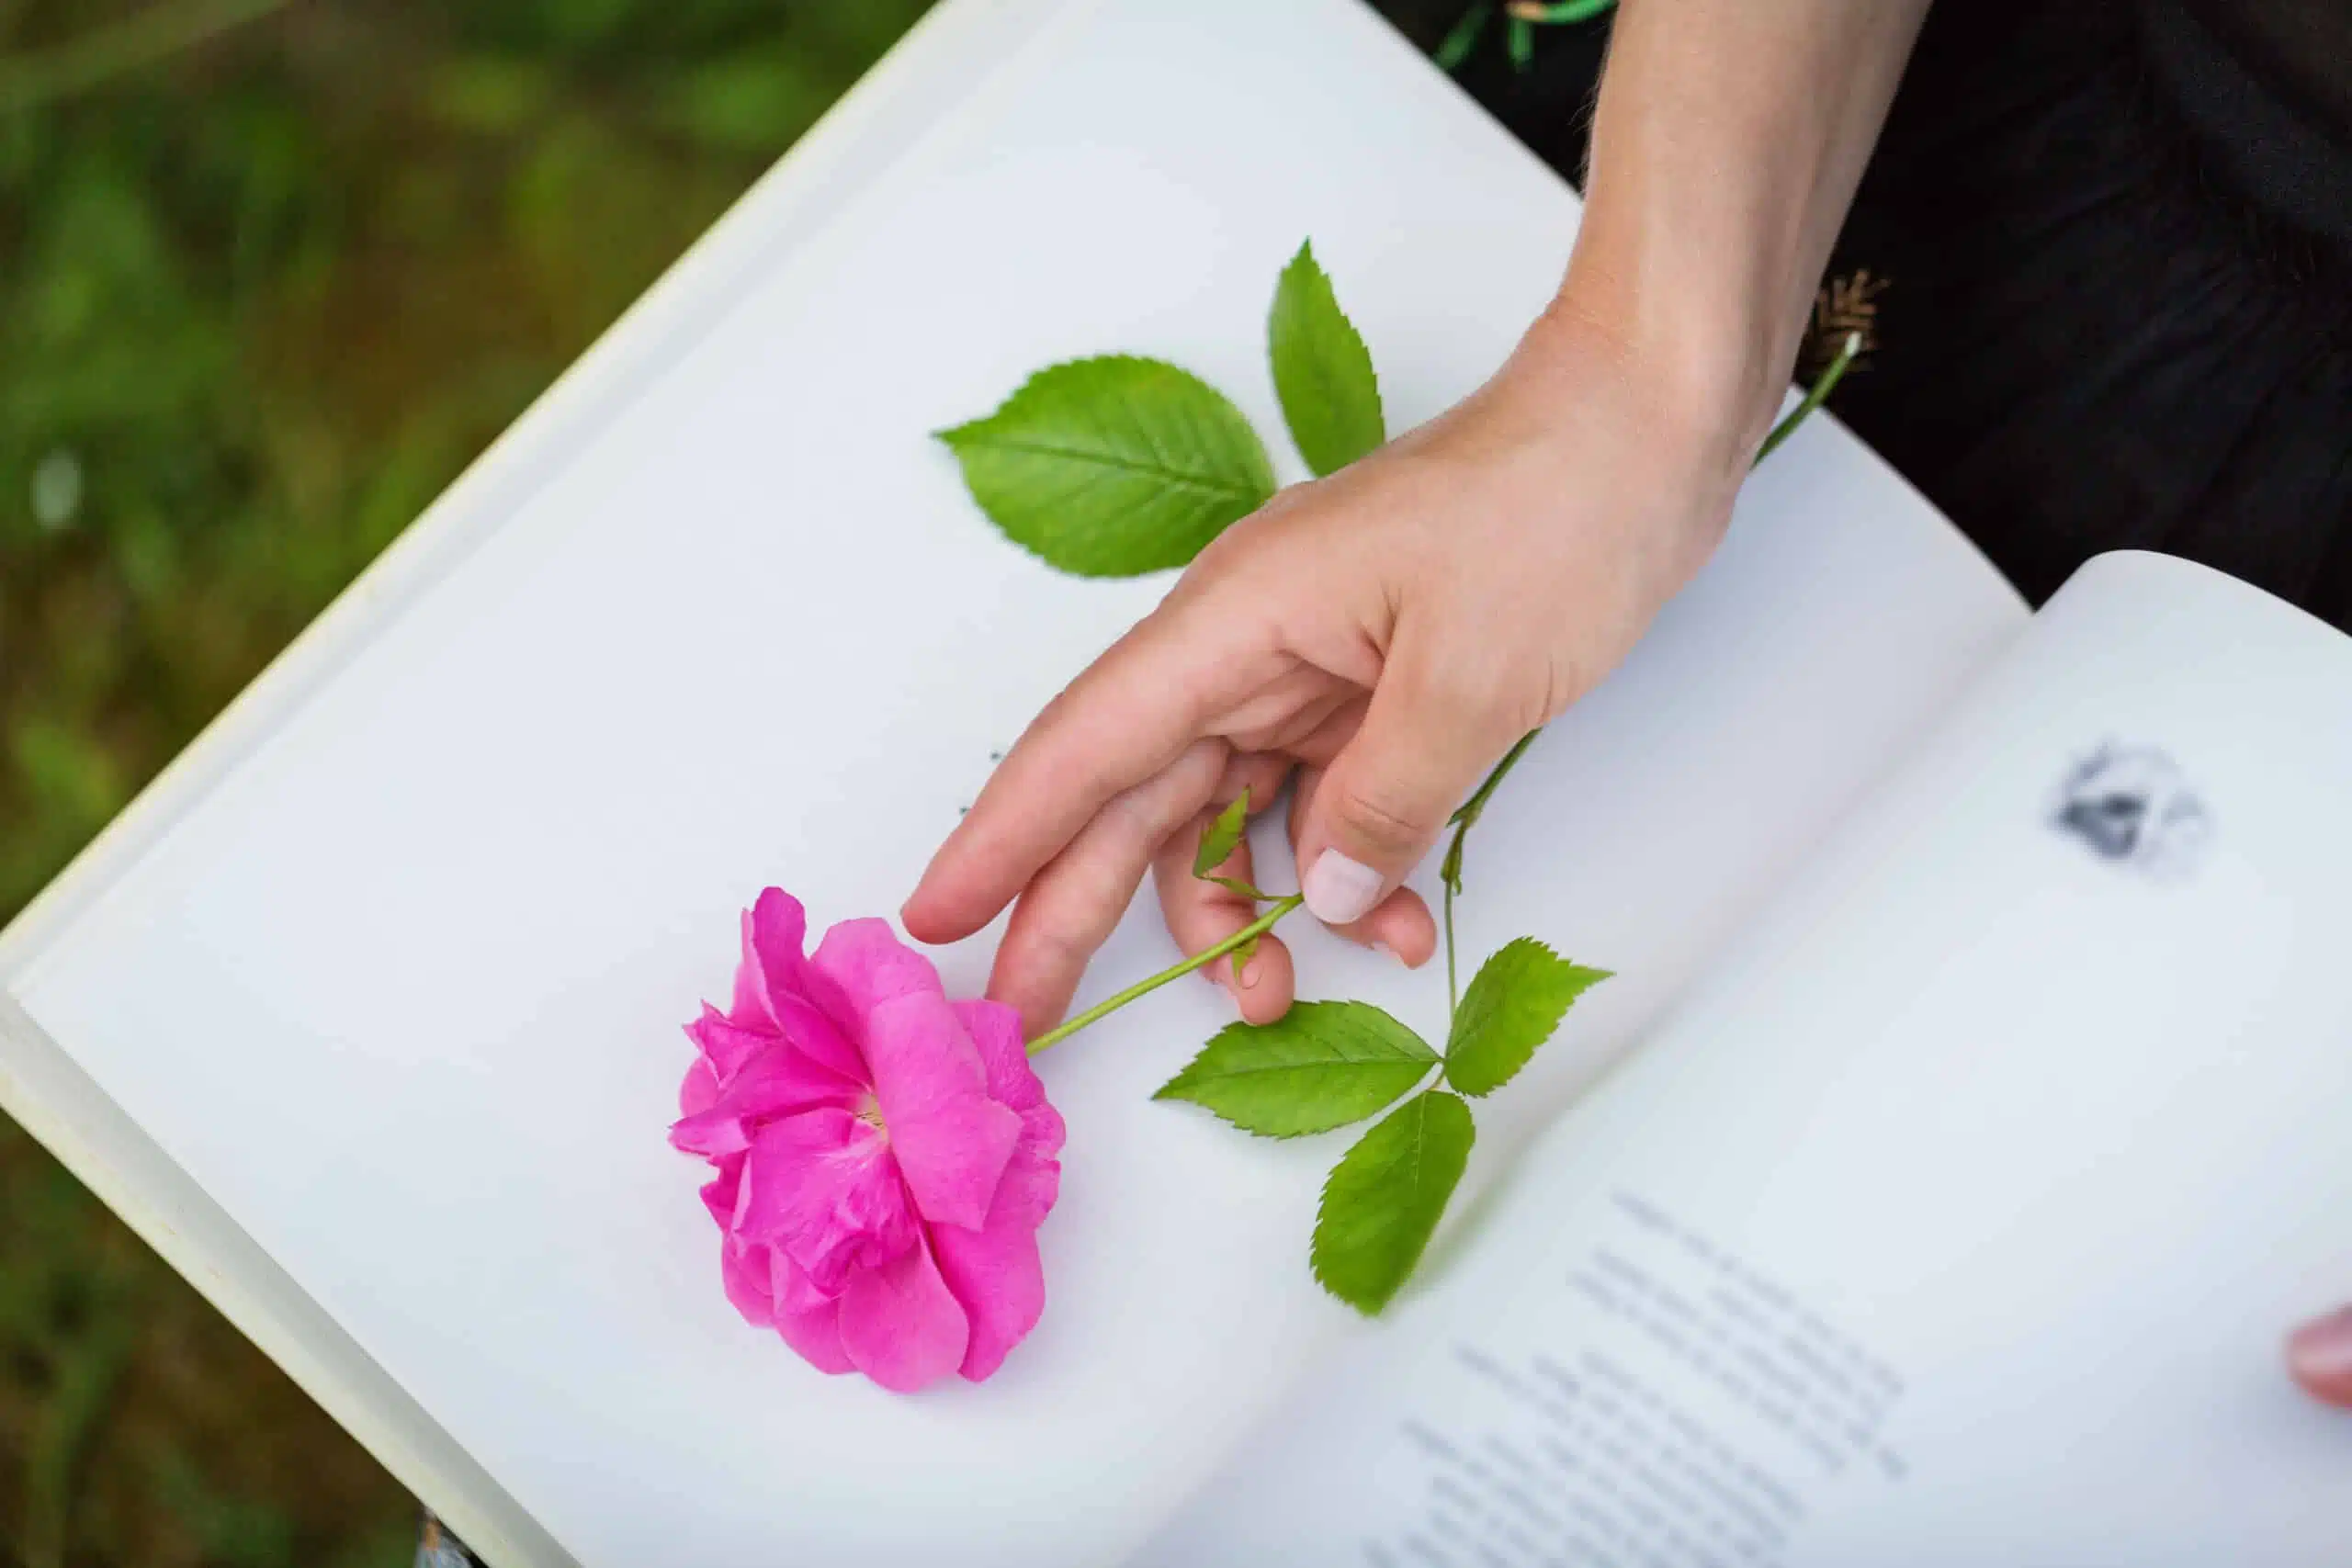 A woman's hand holding a rose on a book in the park